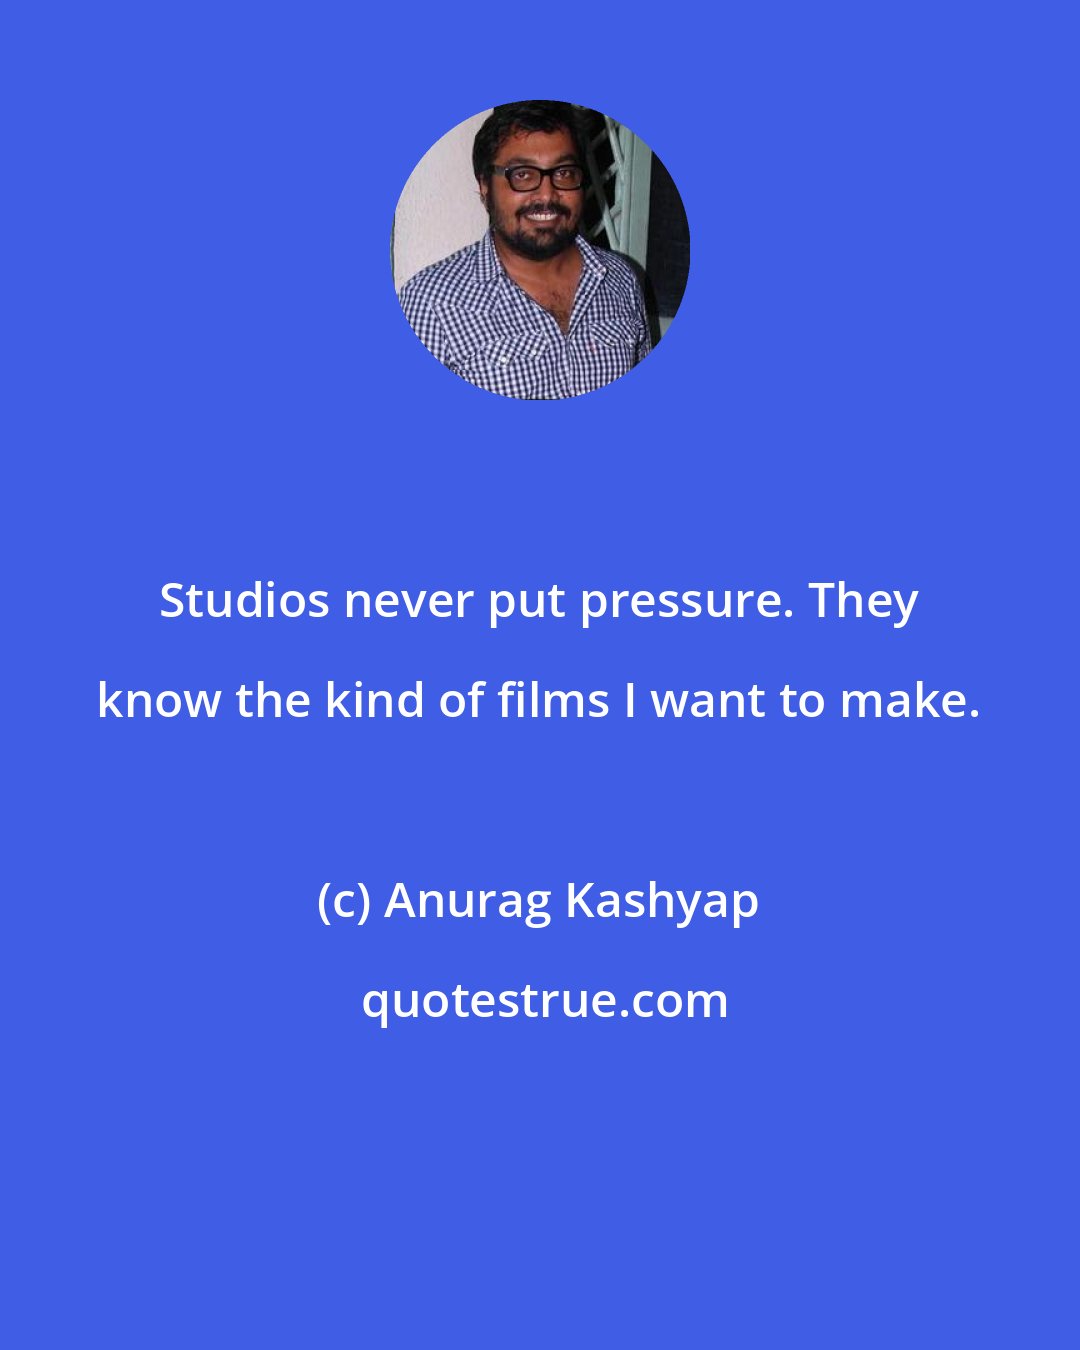 Anurag Kashyap: Studios never put pressure. They know the kind of films I want to make.